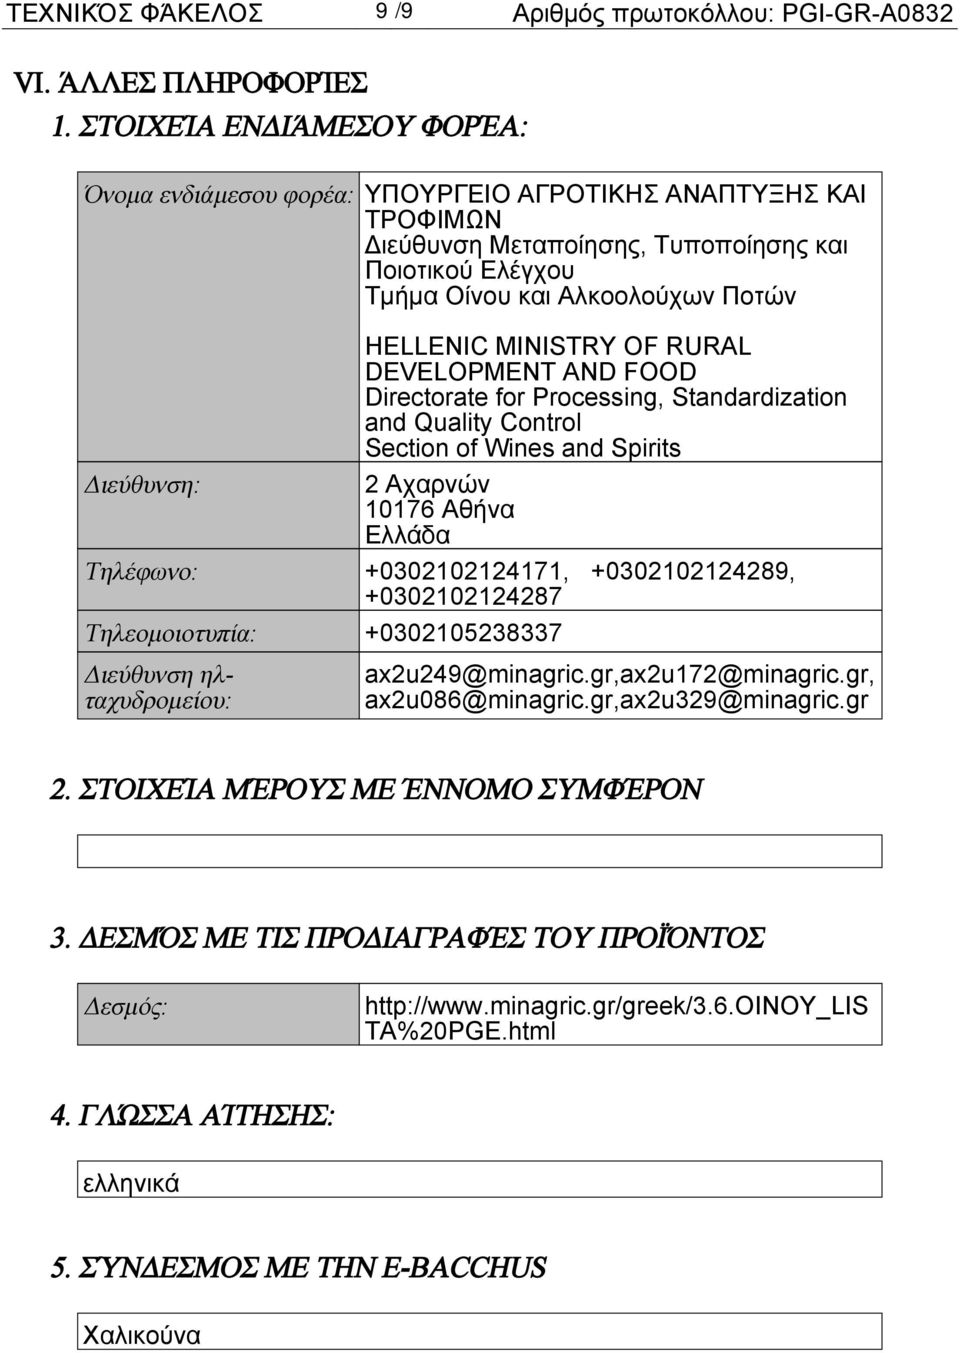 MINISTRY OF RURAL DEVELOPMENT AND FOOD Directorate for Processing, Standardization and Quality Control Section of Wines and Spirits Διεύθυνση: 2 Αχαρνών 10176 Αθήνα Ελλάδα Τηλέφωνο: +0302102124171,